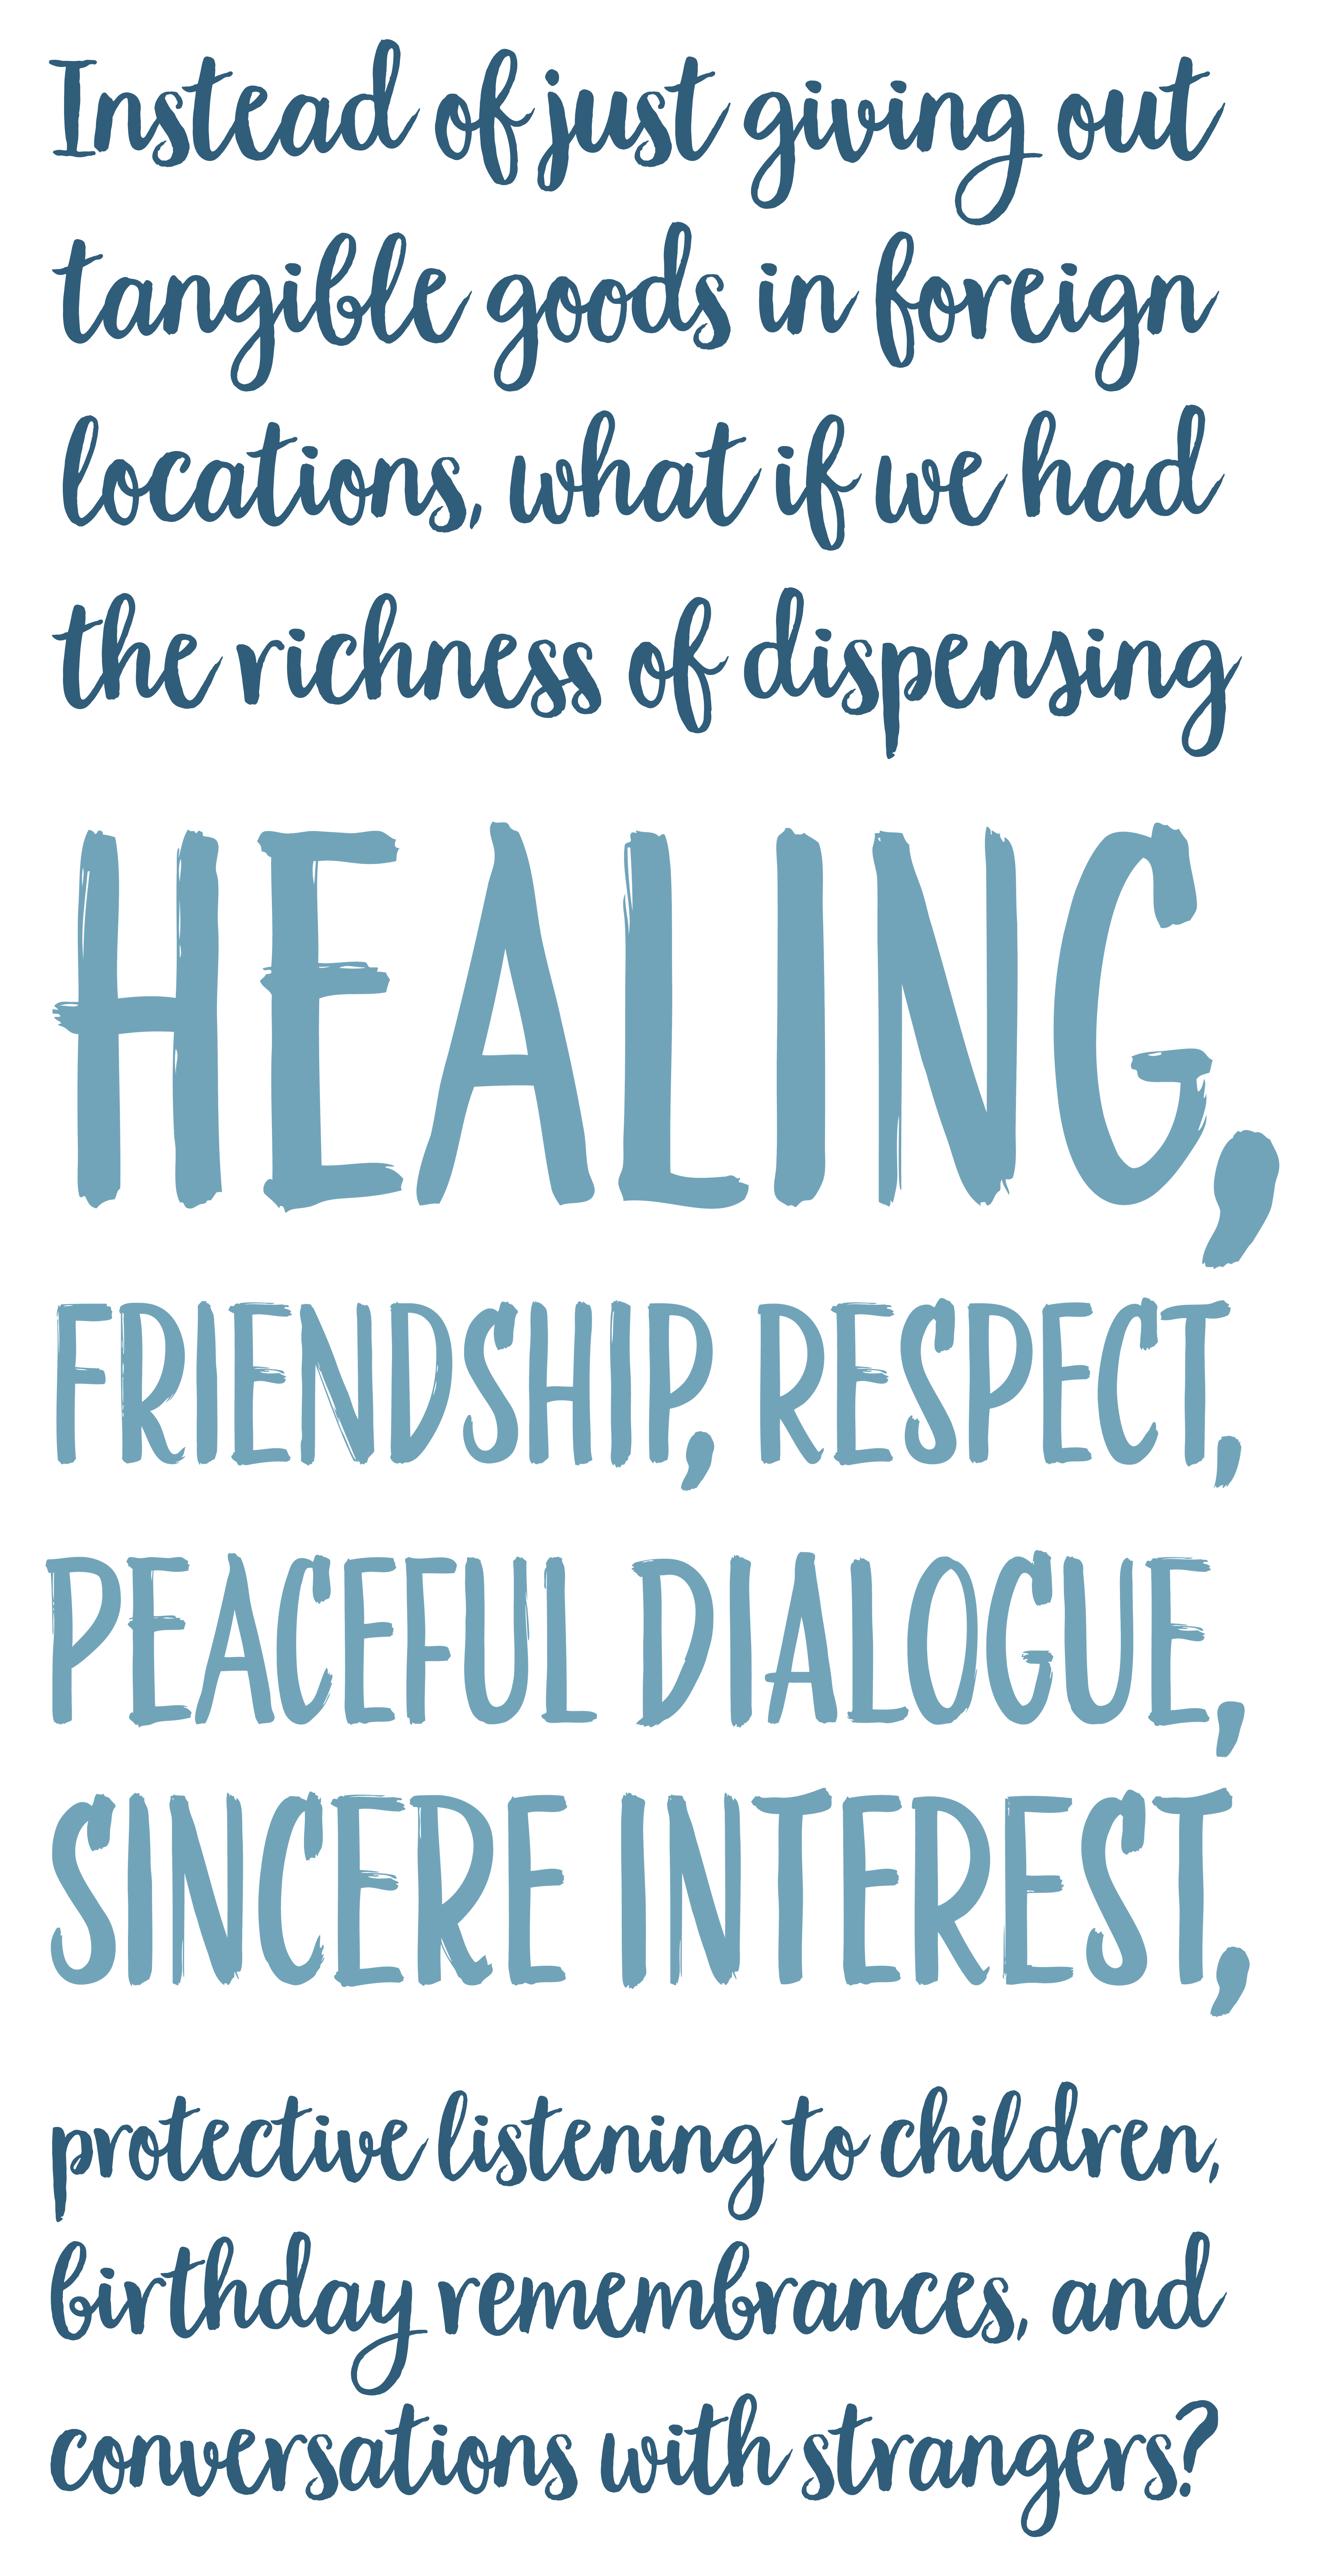 Typographic treatment of pull quote: "Instead of just giving out tangible goods in foreign locations, what if we had the richness of dispensing healing, friendship, respect, peaceful dialogue, sincere interest, protective listening to children, birthday remembrances, and conversations with strangers?